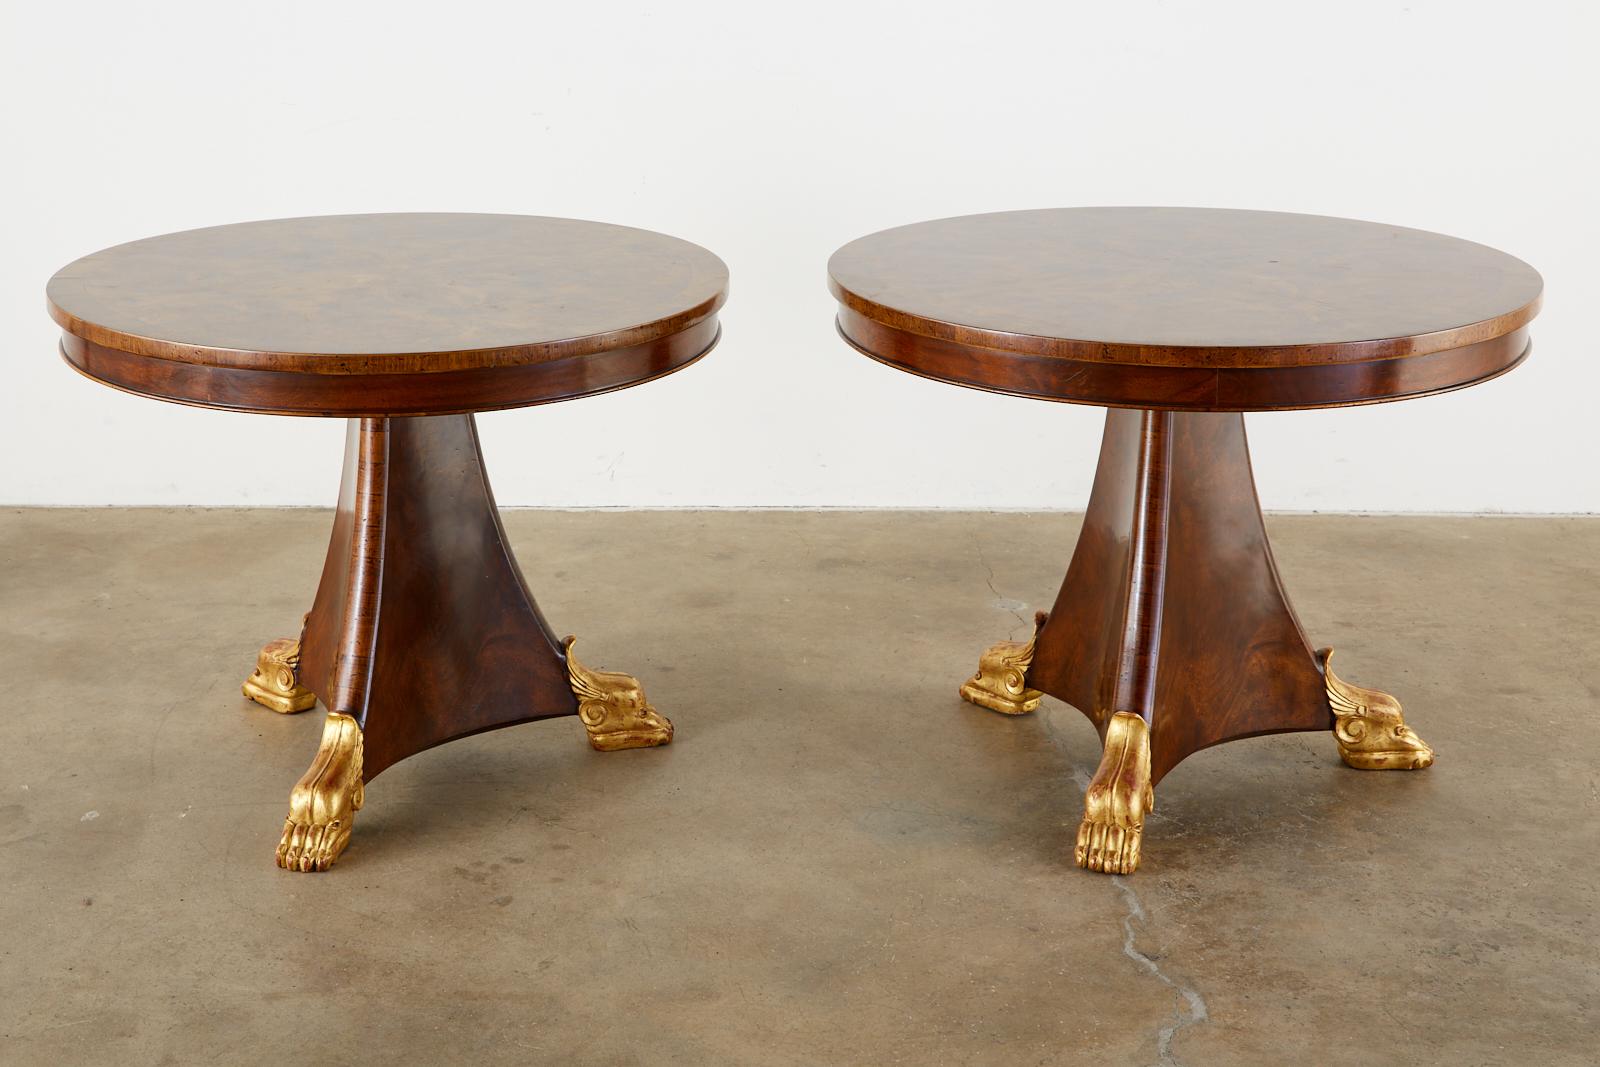 Pair of English Regency Style Burl Wood Library or Center Tables In Good Condition For Sale In Rio Vista, CA